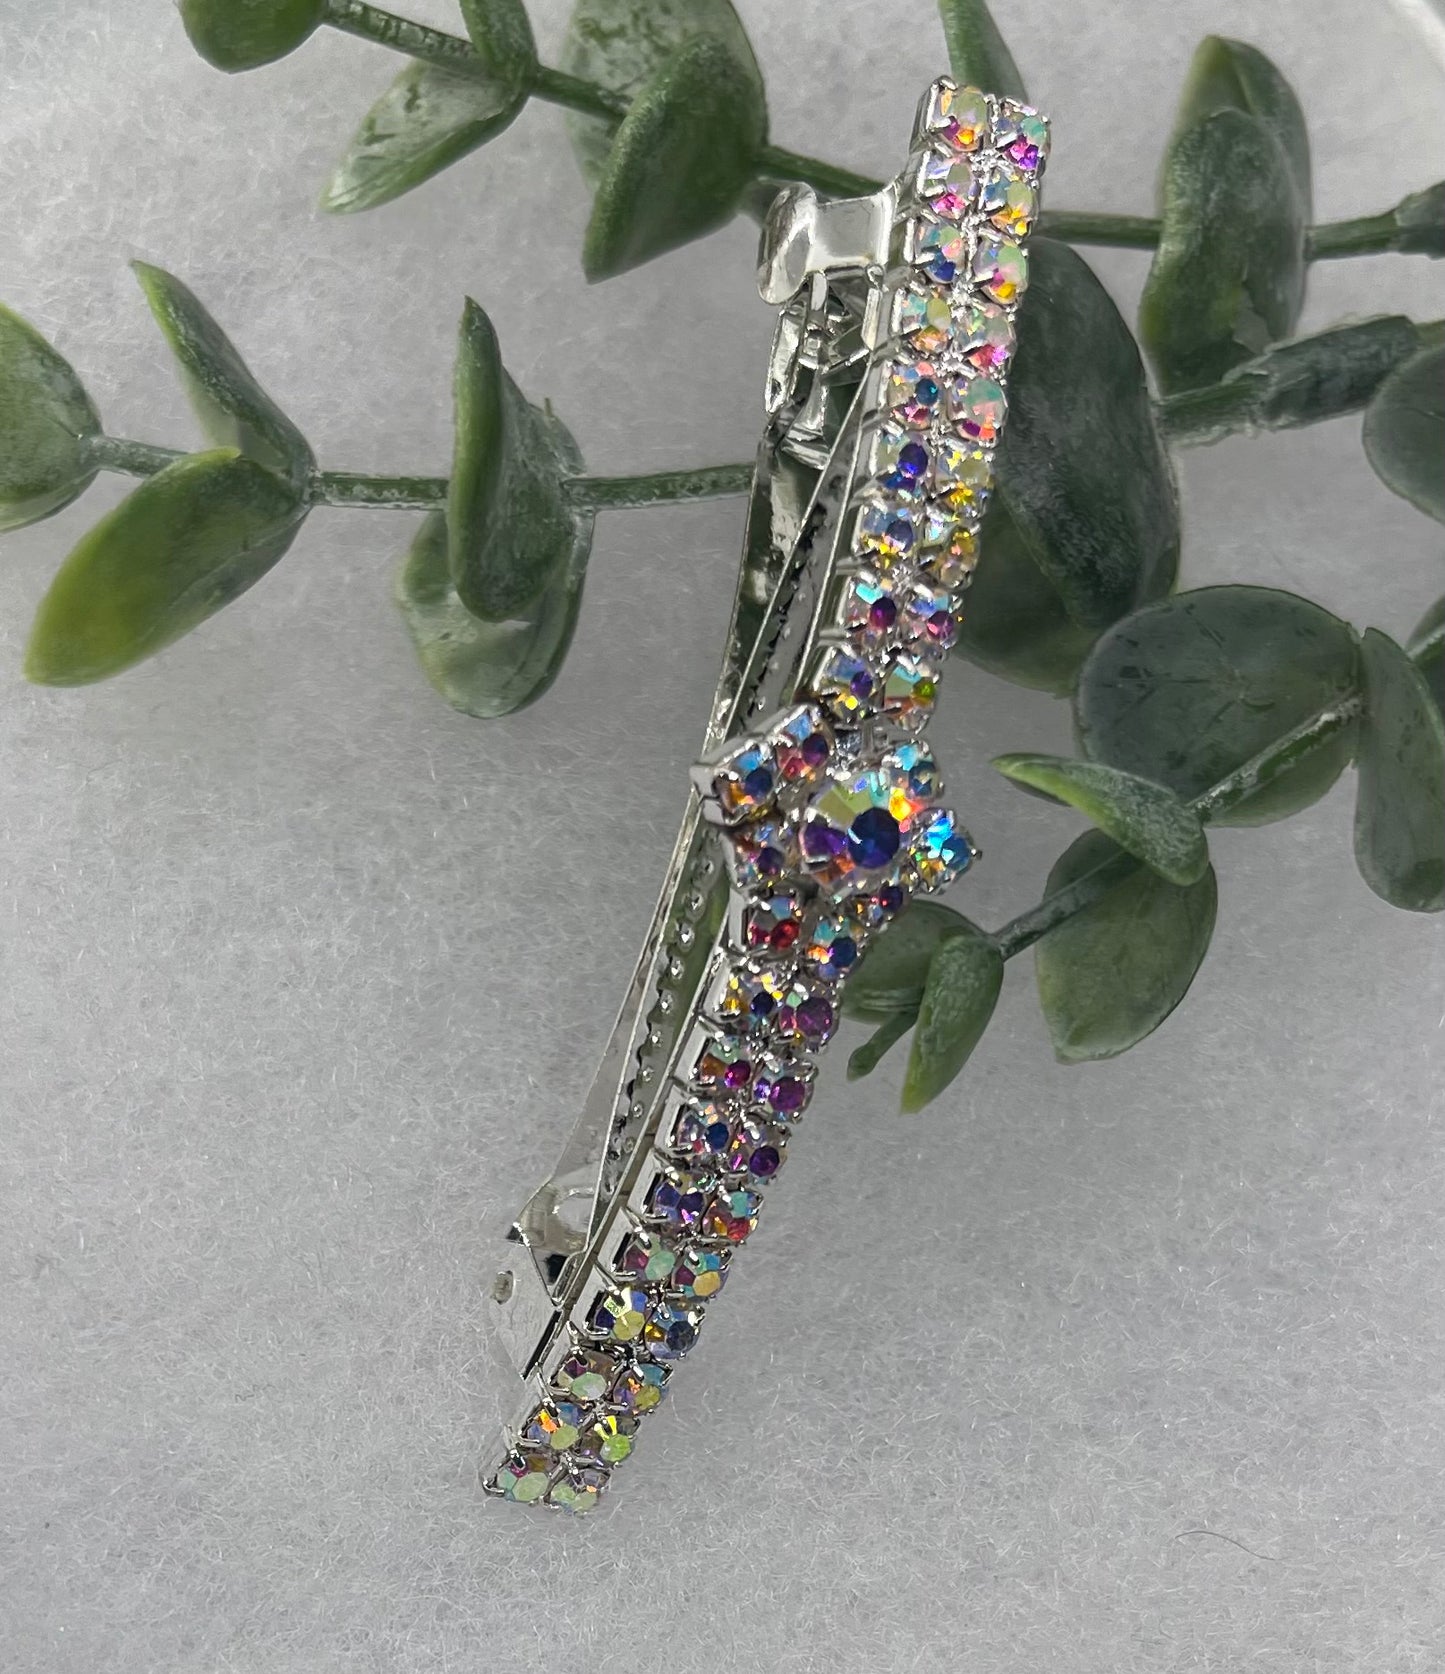 Iridescent Crystal Rhinestone Barrette approximately 3.0”Metal silver tone formal hair accessory gift wedding bridal shower accessories